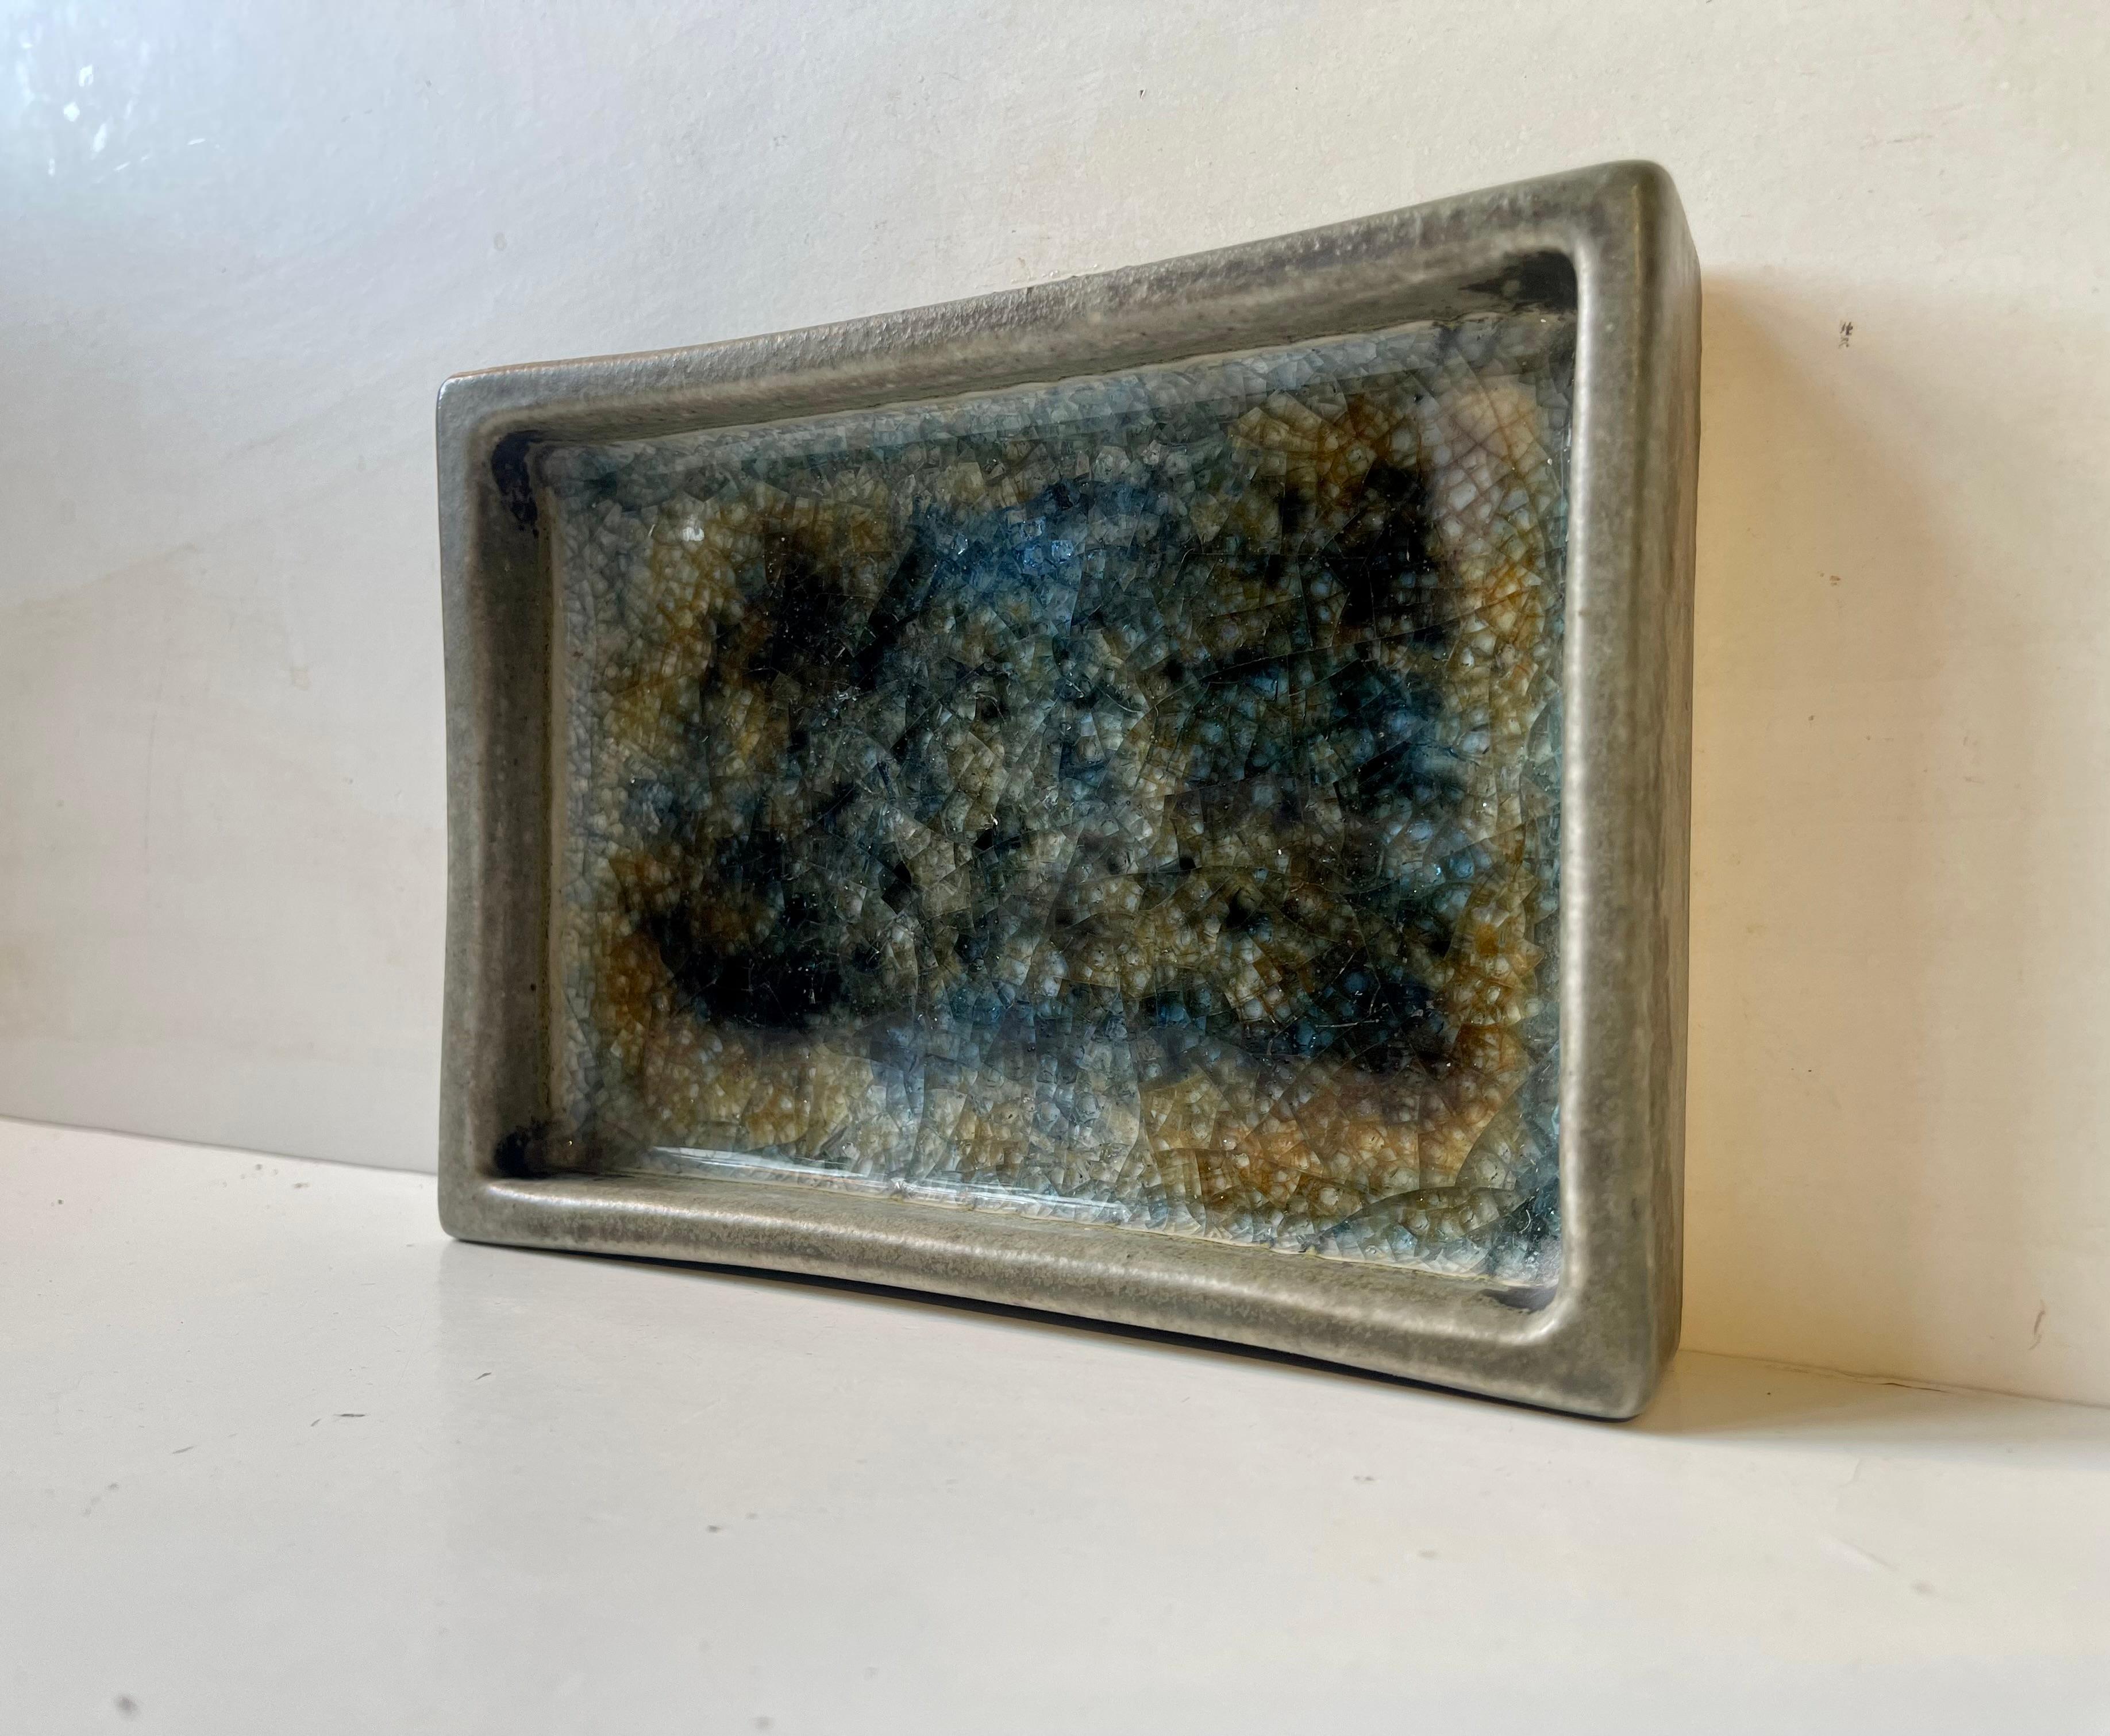 Japanese inspired Scandinavian rectangular stoneware dish by the Danish ceramist Gordon Petersen. This type is commonly referred to as a Sea of Glaze in Denmark due to the thick glossy layer of glaze to its show side. It is hand-signed by the